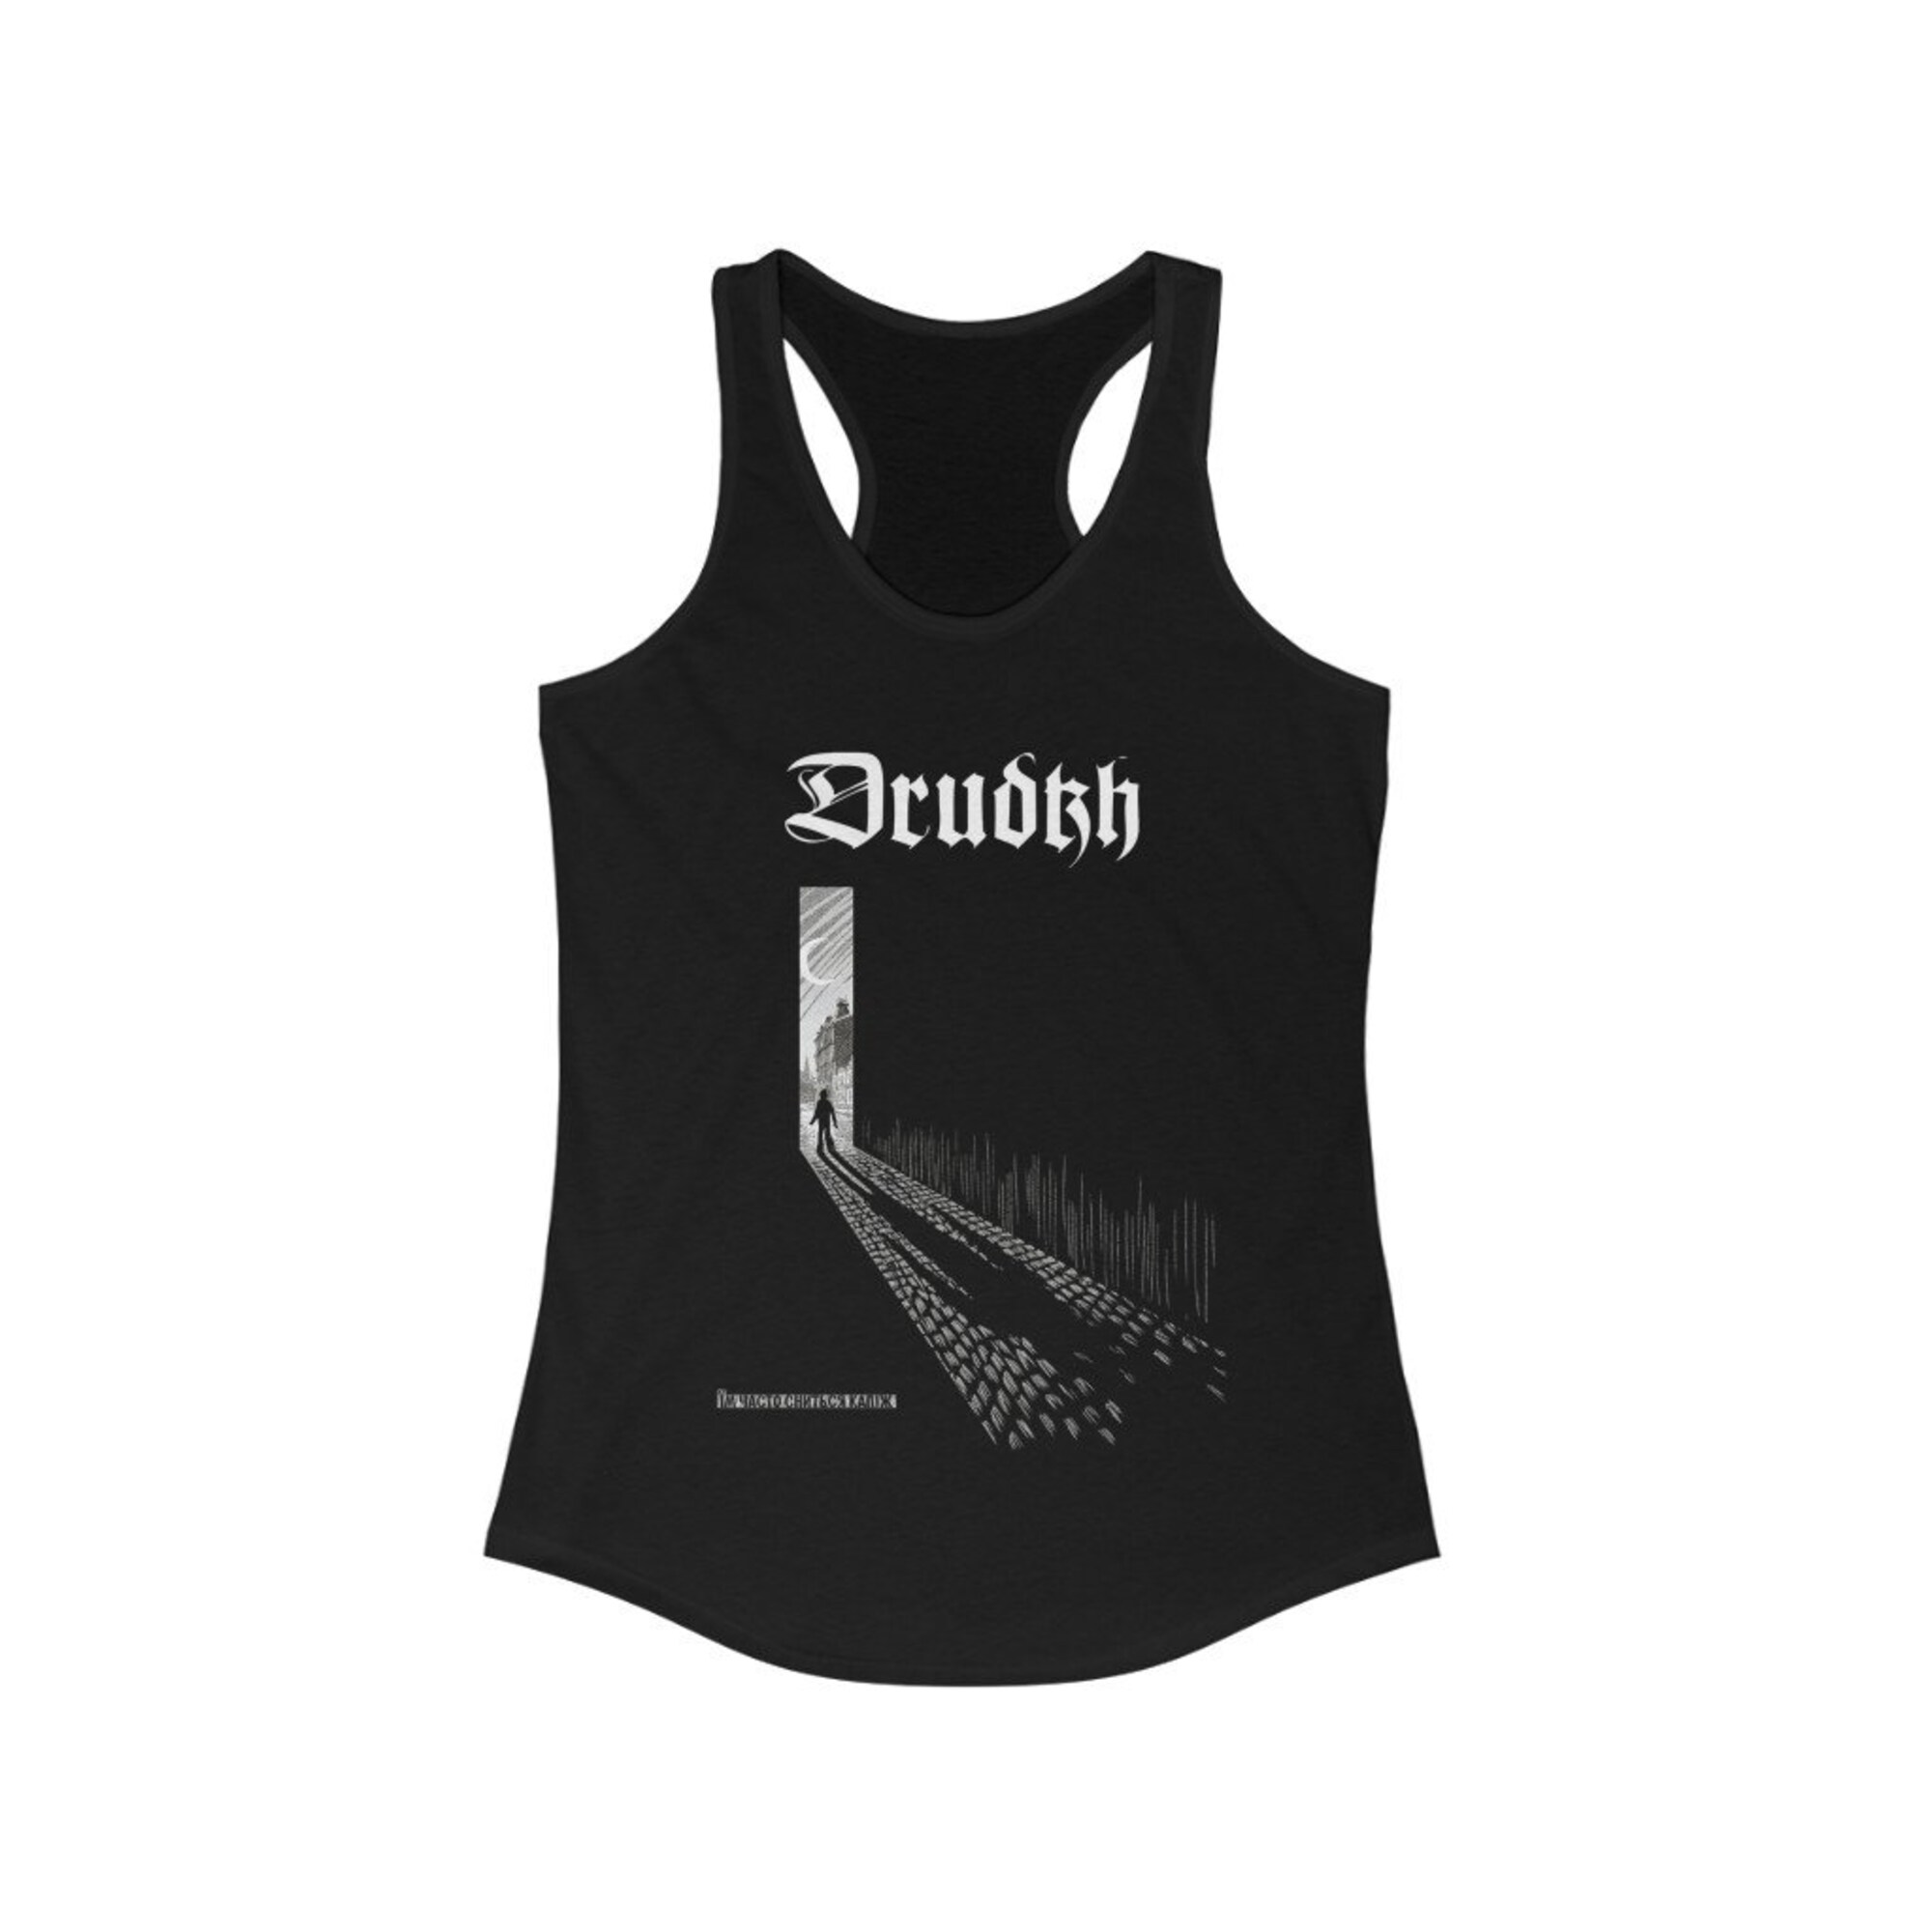 Discover Drudkh Womens Tank Top - They Often See Dreams About The Spring Tee - Black Metal Band